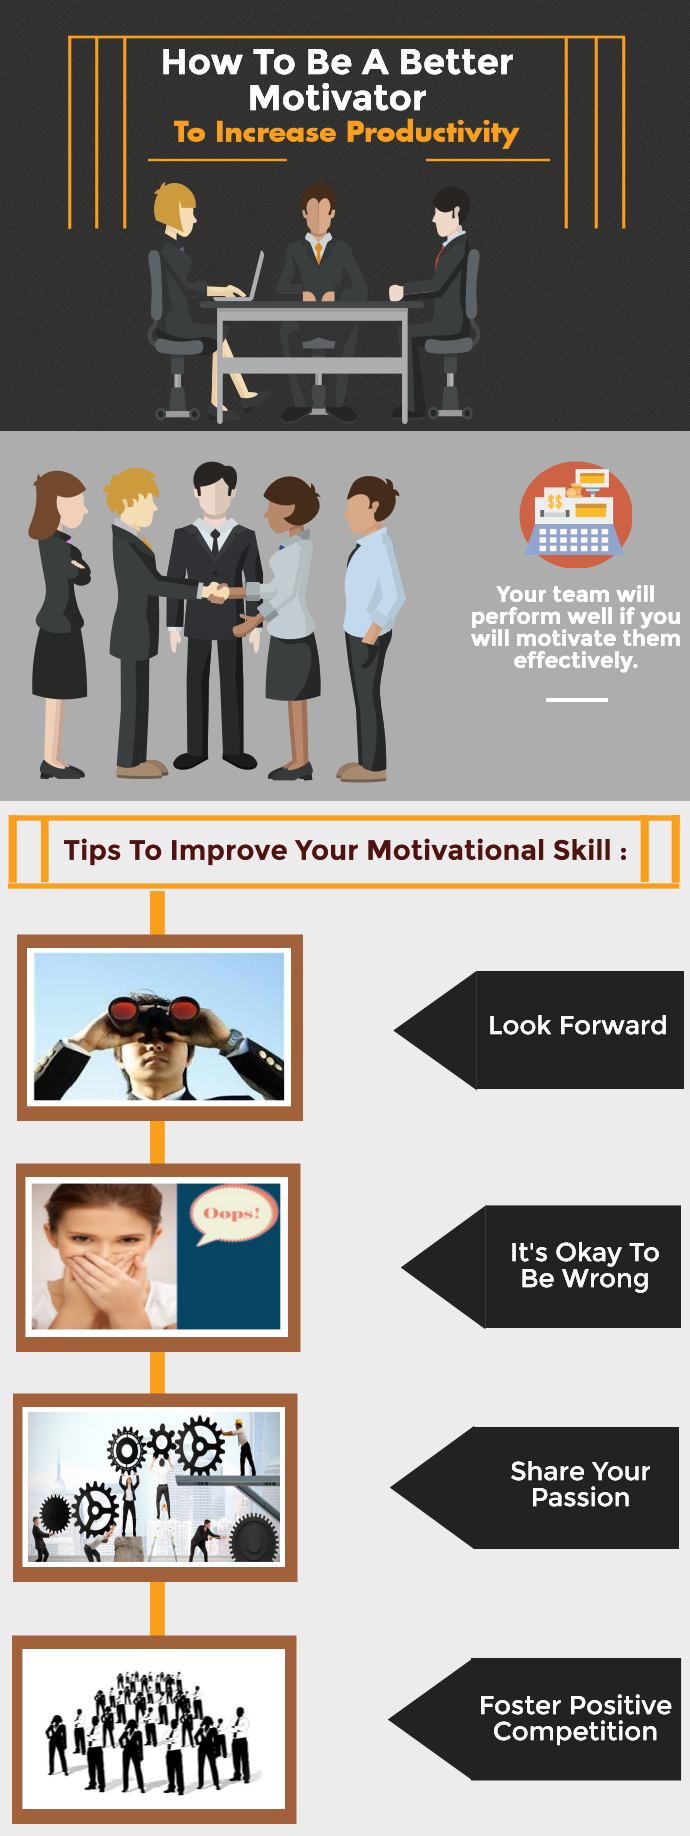 How To Be A Better Motivator